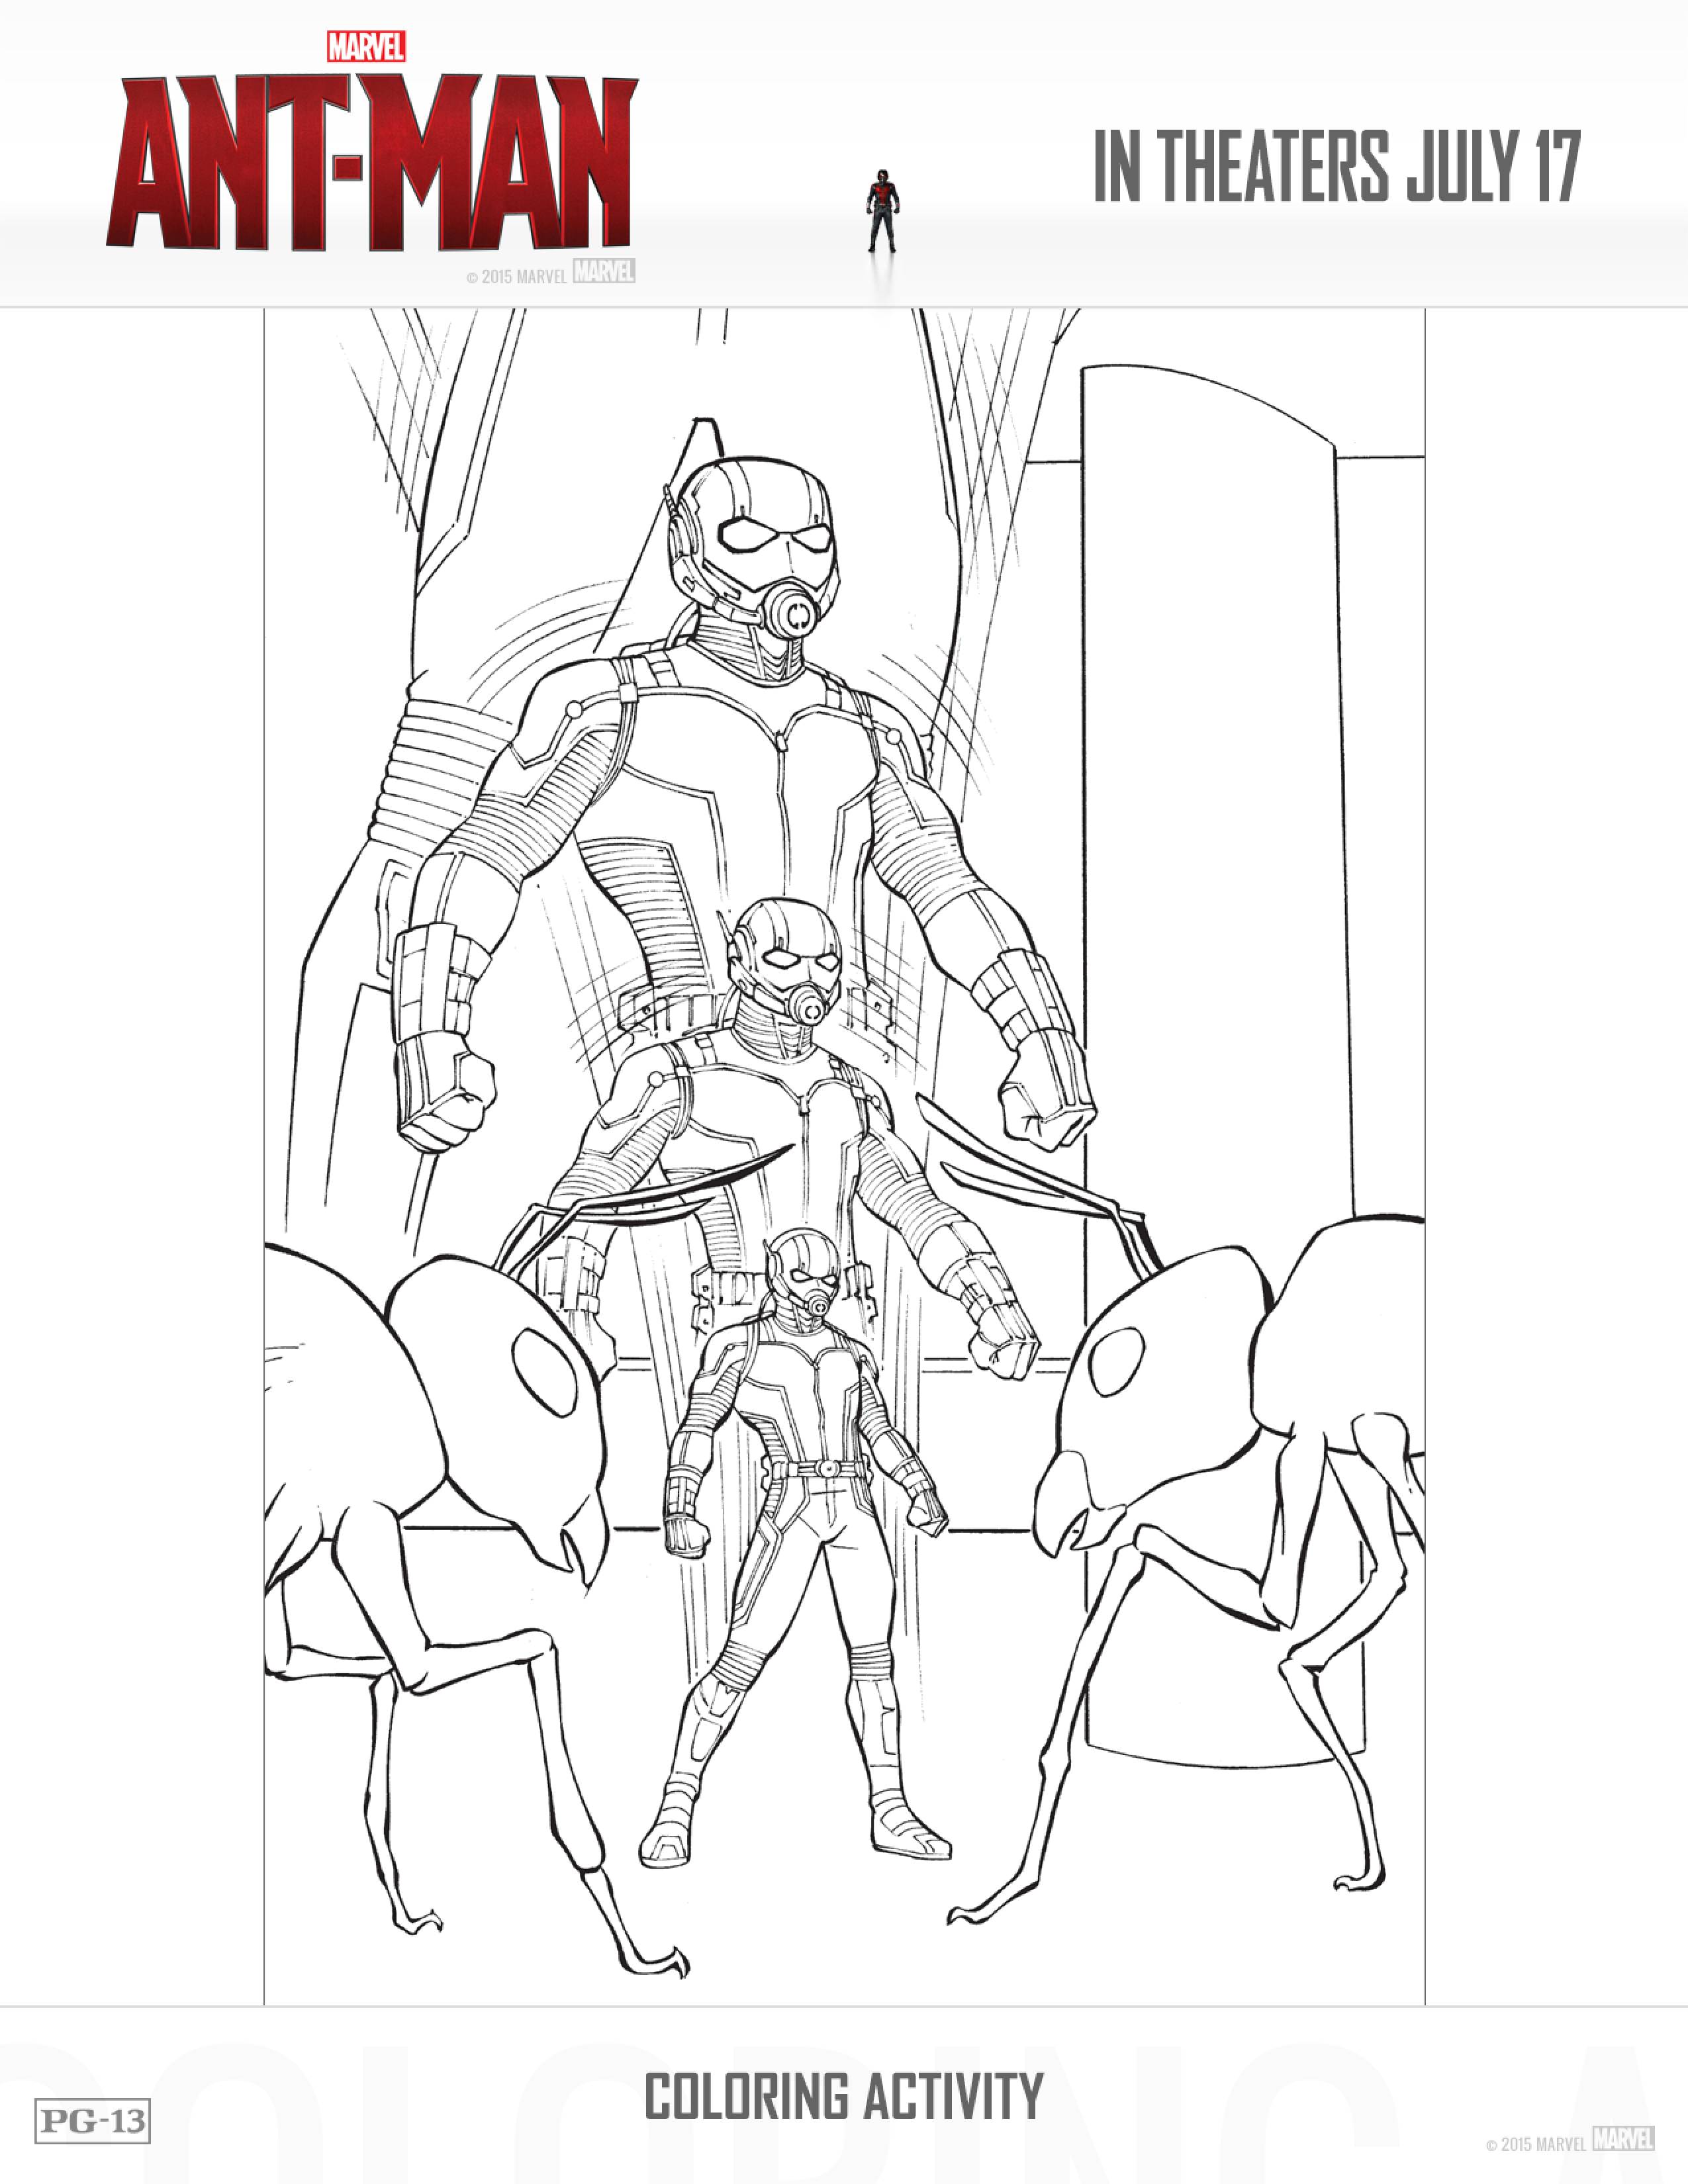 ANT-MAN Coloring Sheets, Mazes, Match Games and More! #AntMan 9